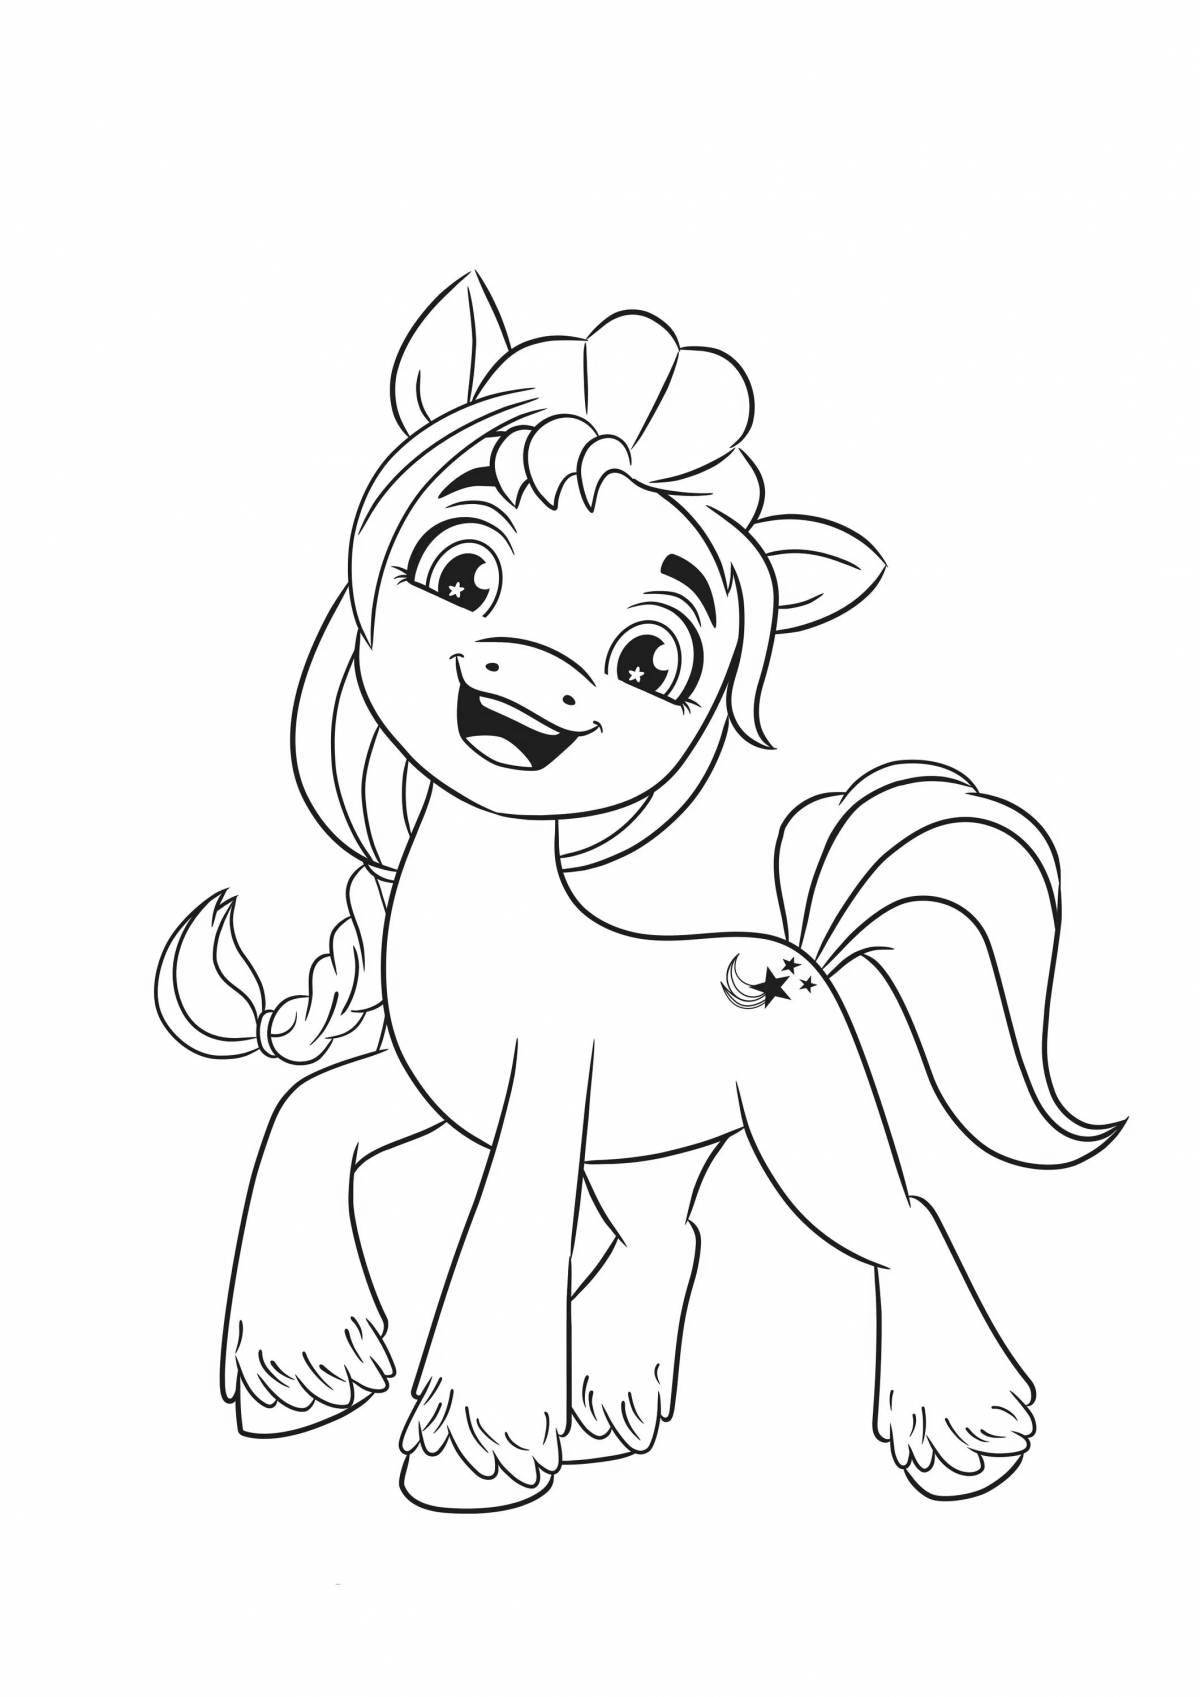 Playful pony cartoon coloring page